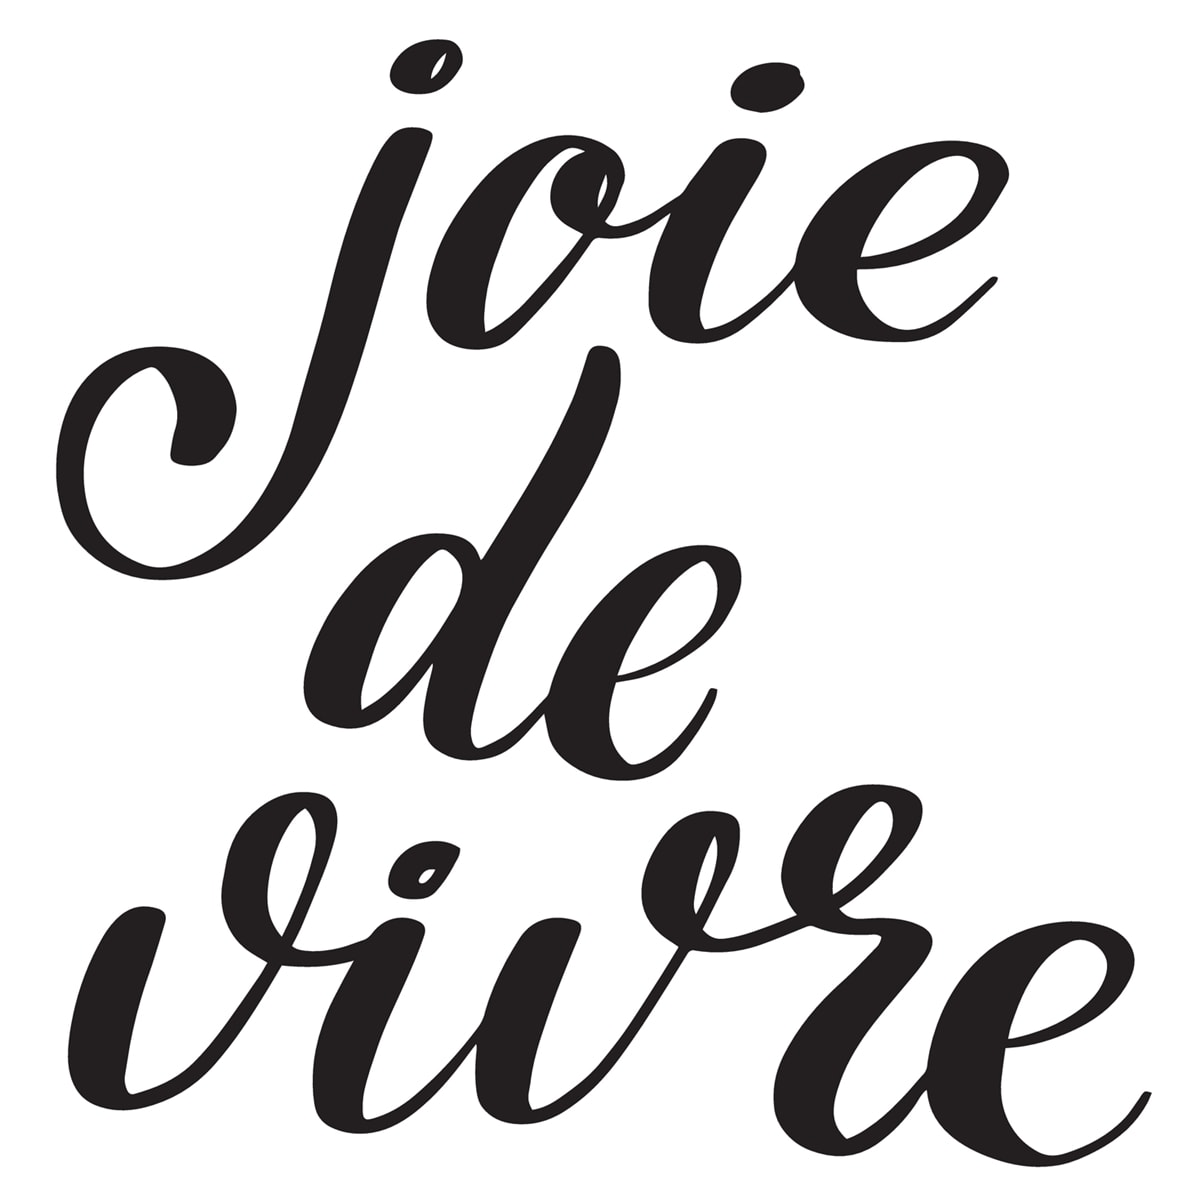 Joie is derived from the French phrase Joie de vivre, also used in English to express a cheerful enjoyment of life